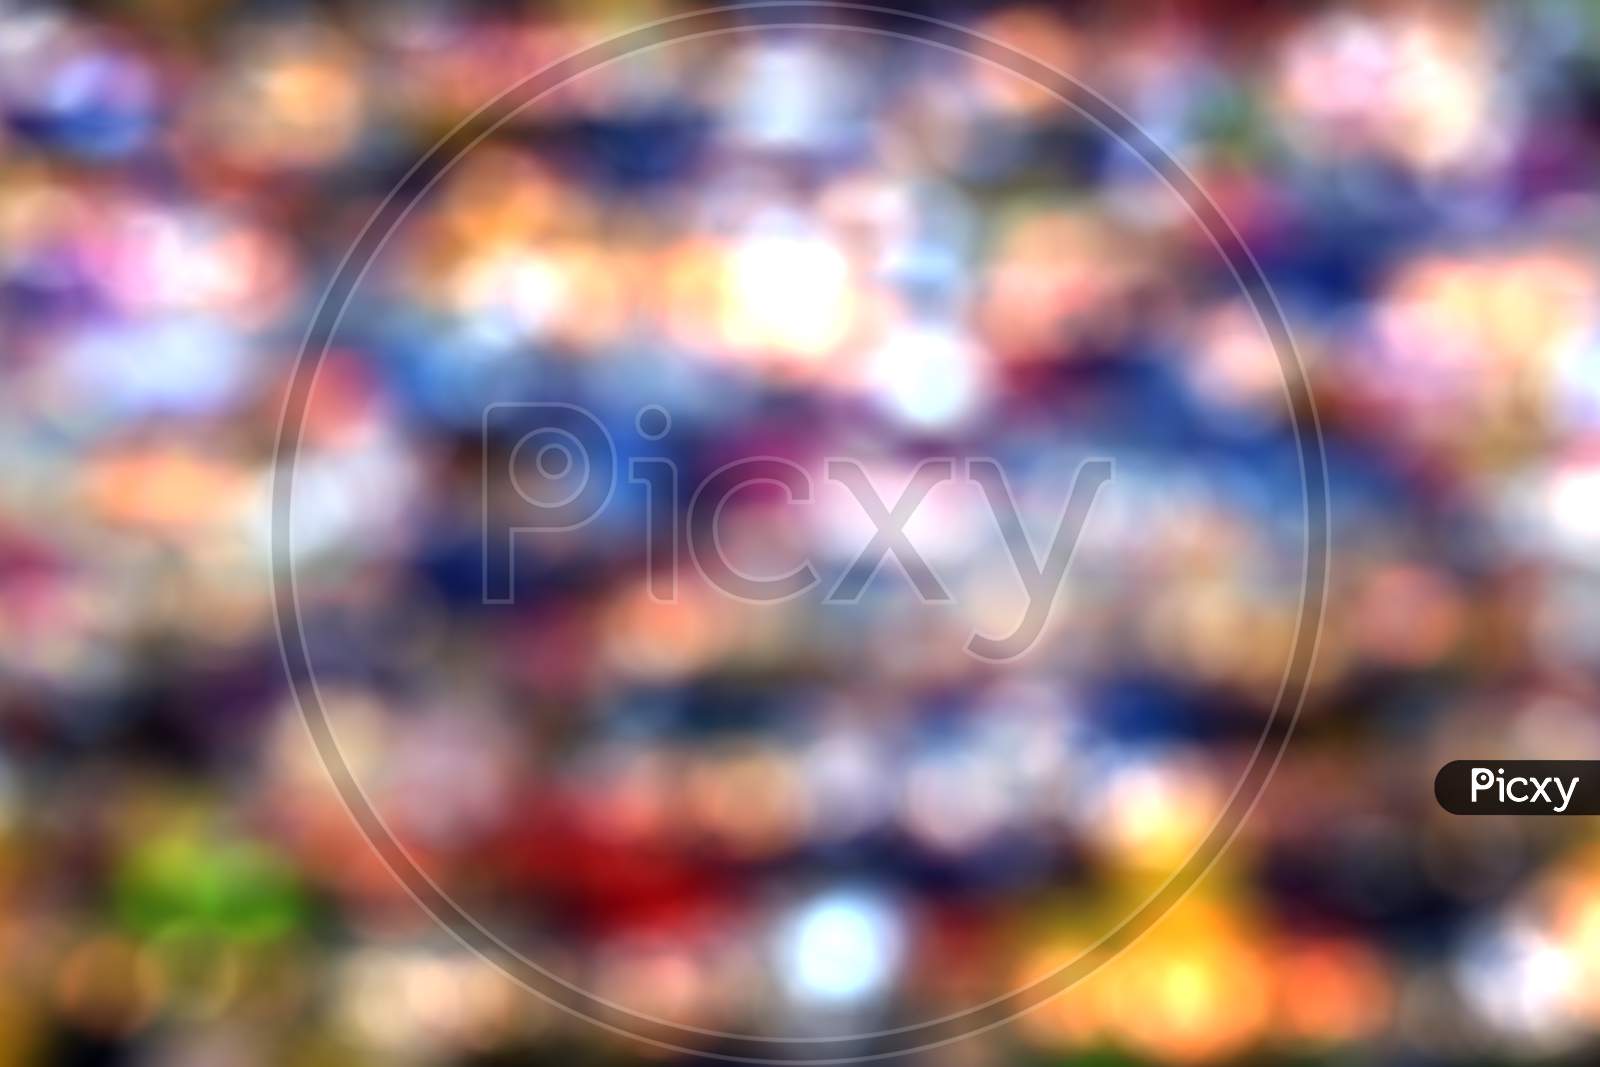 Blur Abstract Bokeh Background Element For Overlay, Colorful Defocused Light